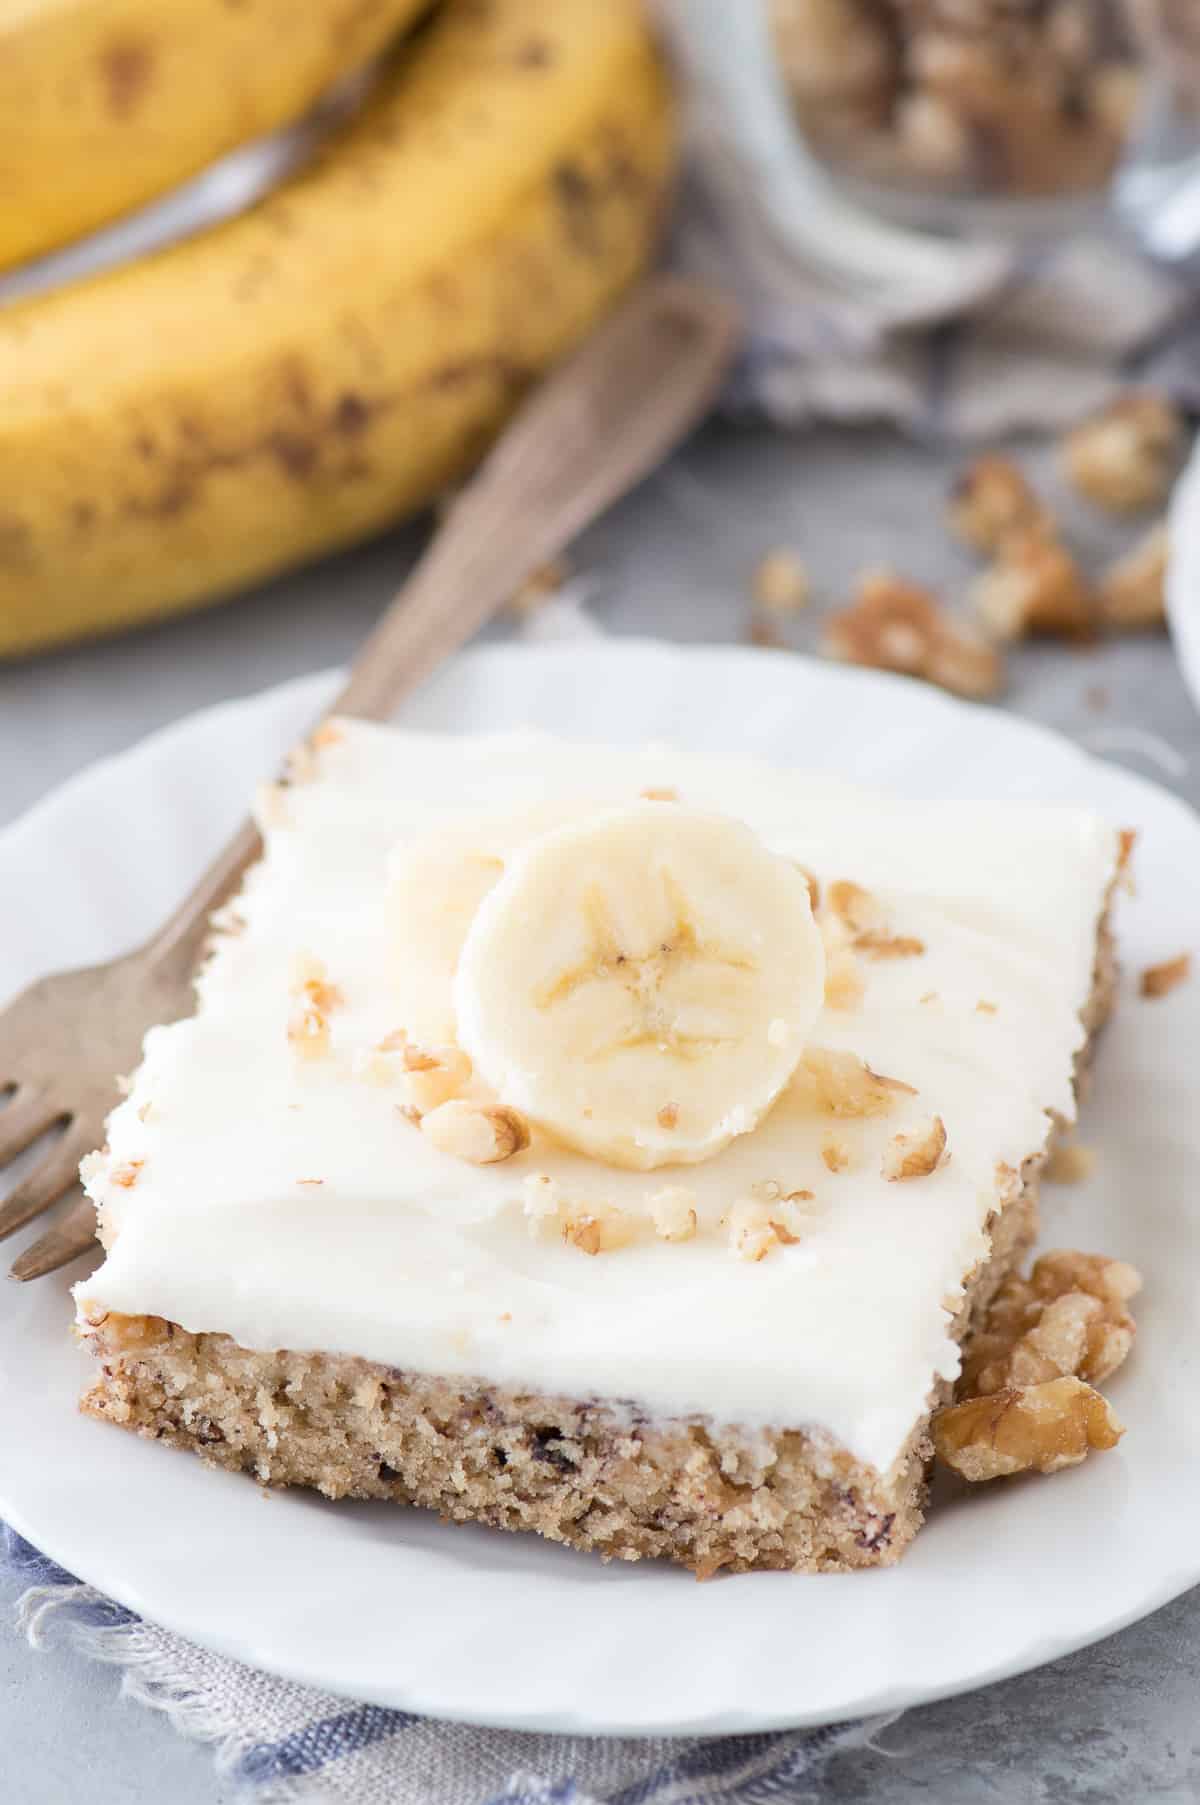 banana bar with cream cheese frosting and banana slice on white plate